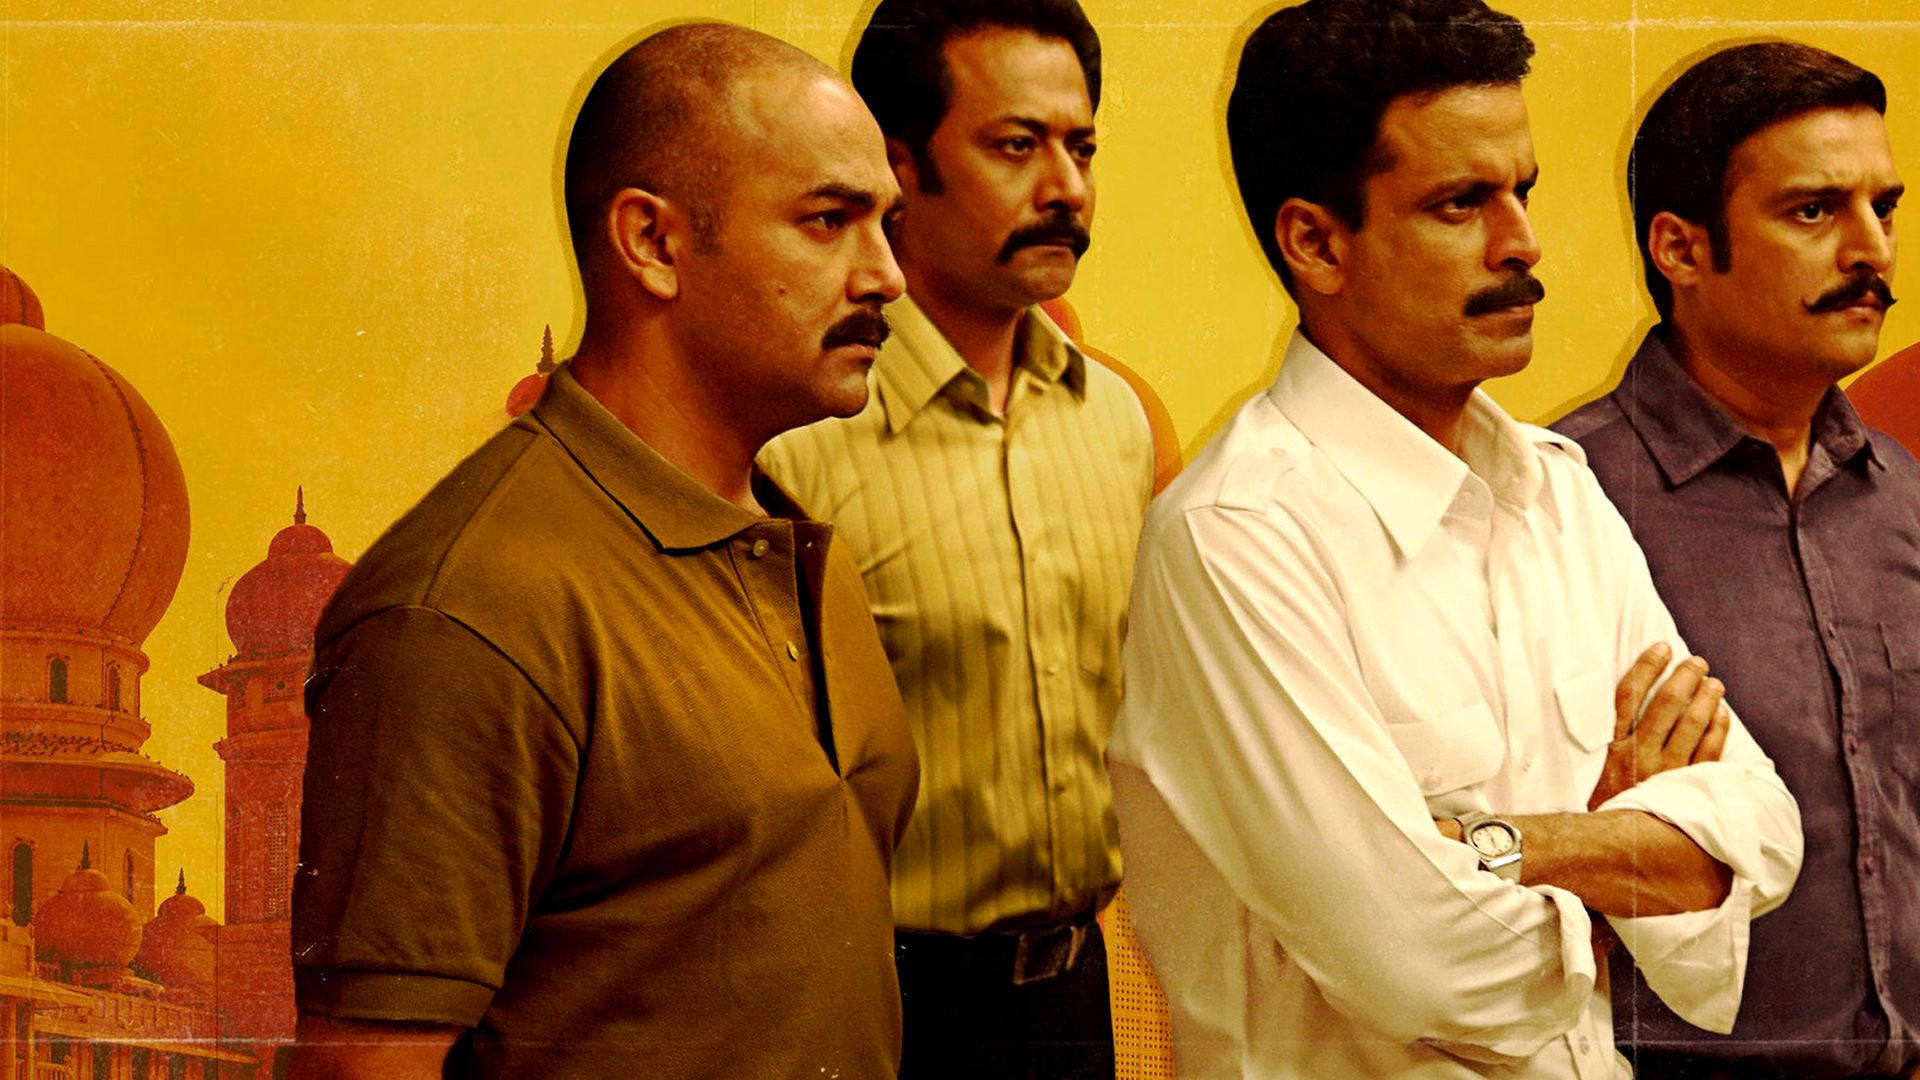 Special 26 background